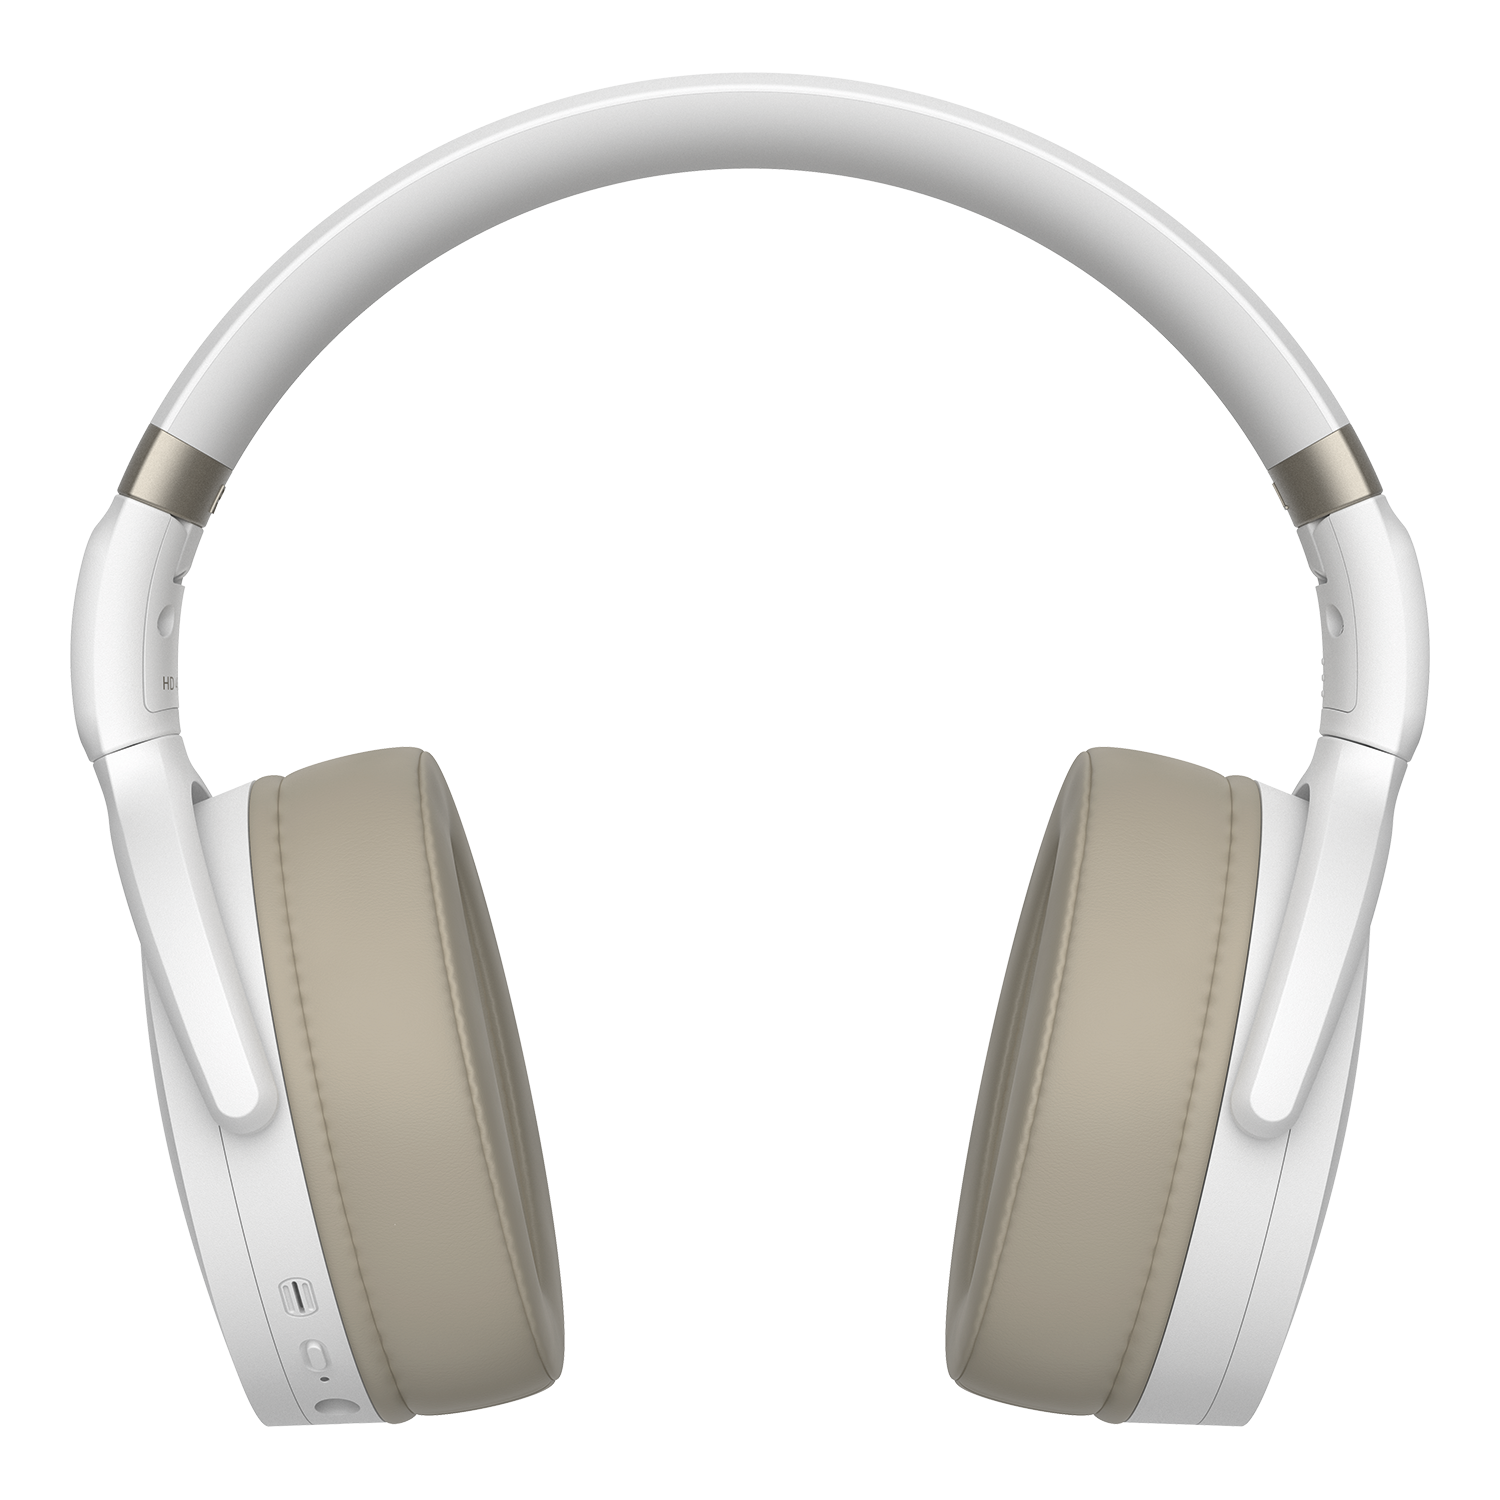 On-Ear Headphones PNG Images HD